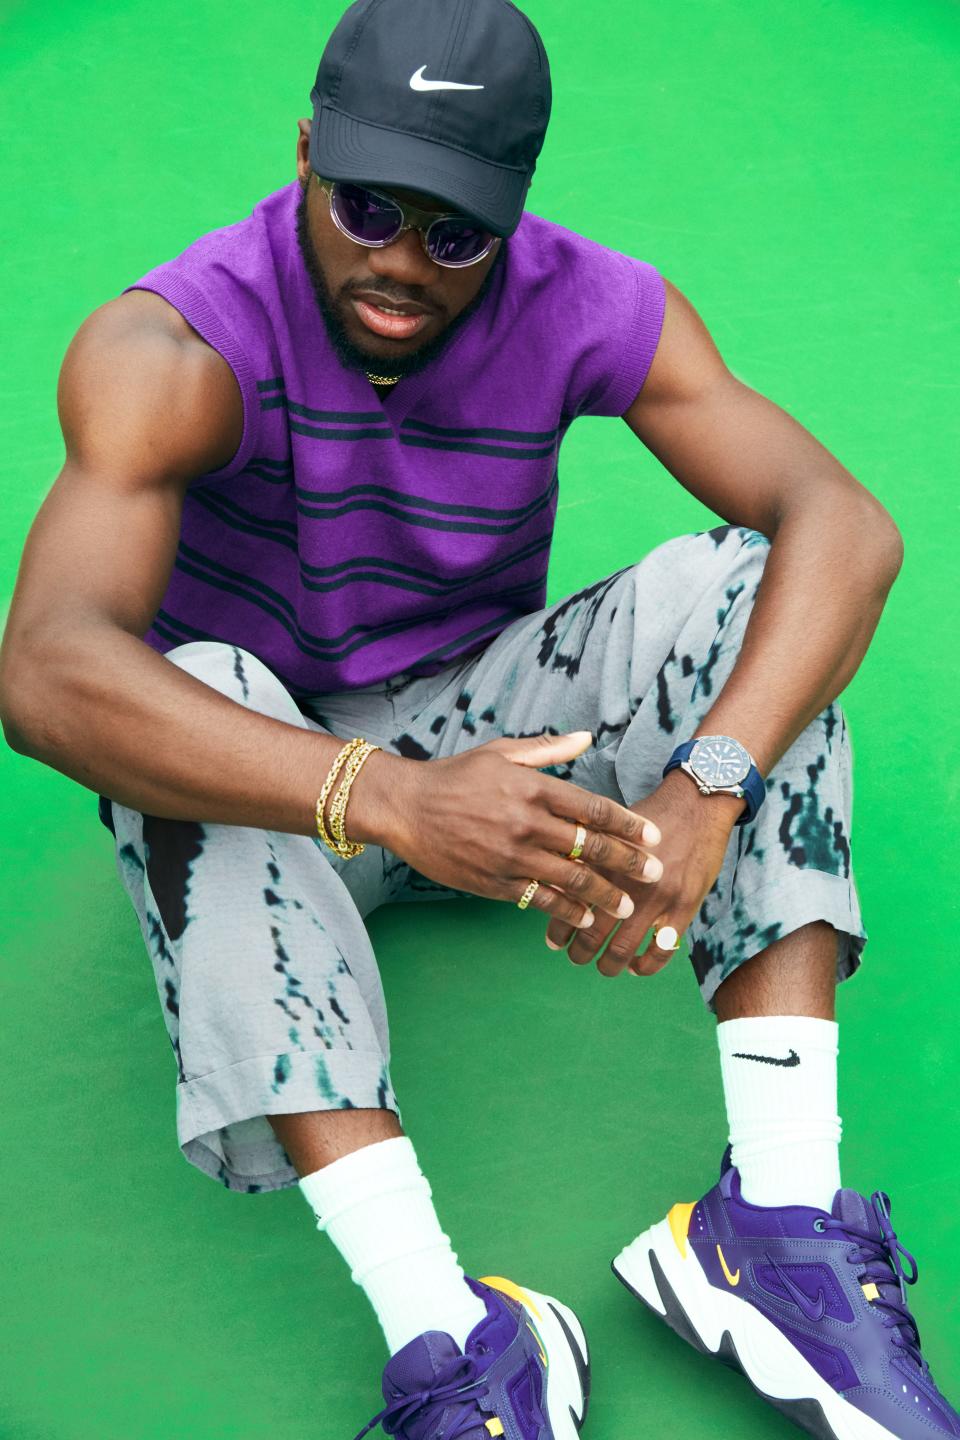 <cite class="credit">Vest, $1,195, by Lanvin / Pants, $1,895, by Giorgio Armani / Sneakers, $100, socks, $14 (for three pairs), and hat, $24, by Nike / Sunglasses, $230, by Retrosuperfuture / Watch, $2,500, by TAG Heuer / Ring (on left hand): $270, by Phira; rings (on right hand): $1,350 (pinkie finger), and $1,600 (middle finger), by Tiffany & Co.</cite>